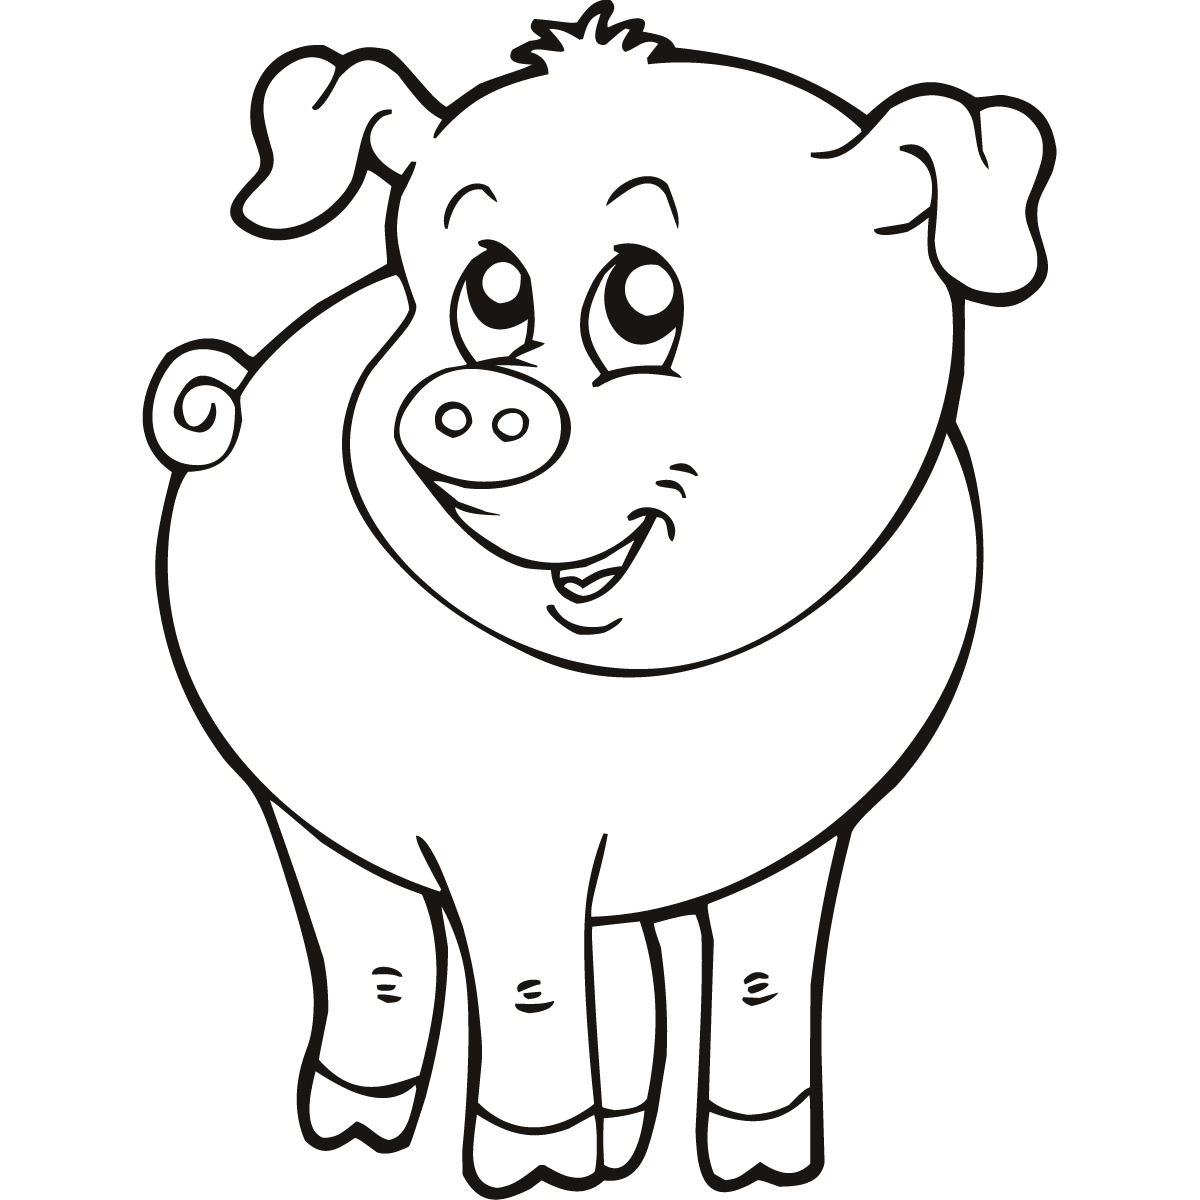 Best Photos of Farm Animal Drawings For Kids - Easy to Draw ...